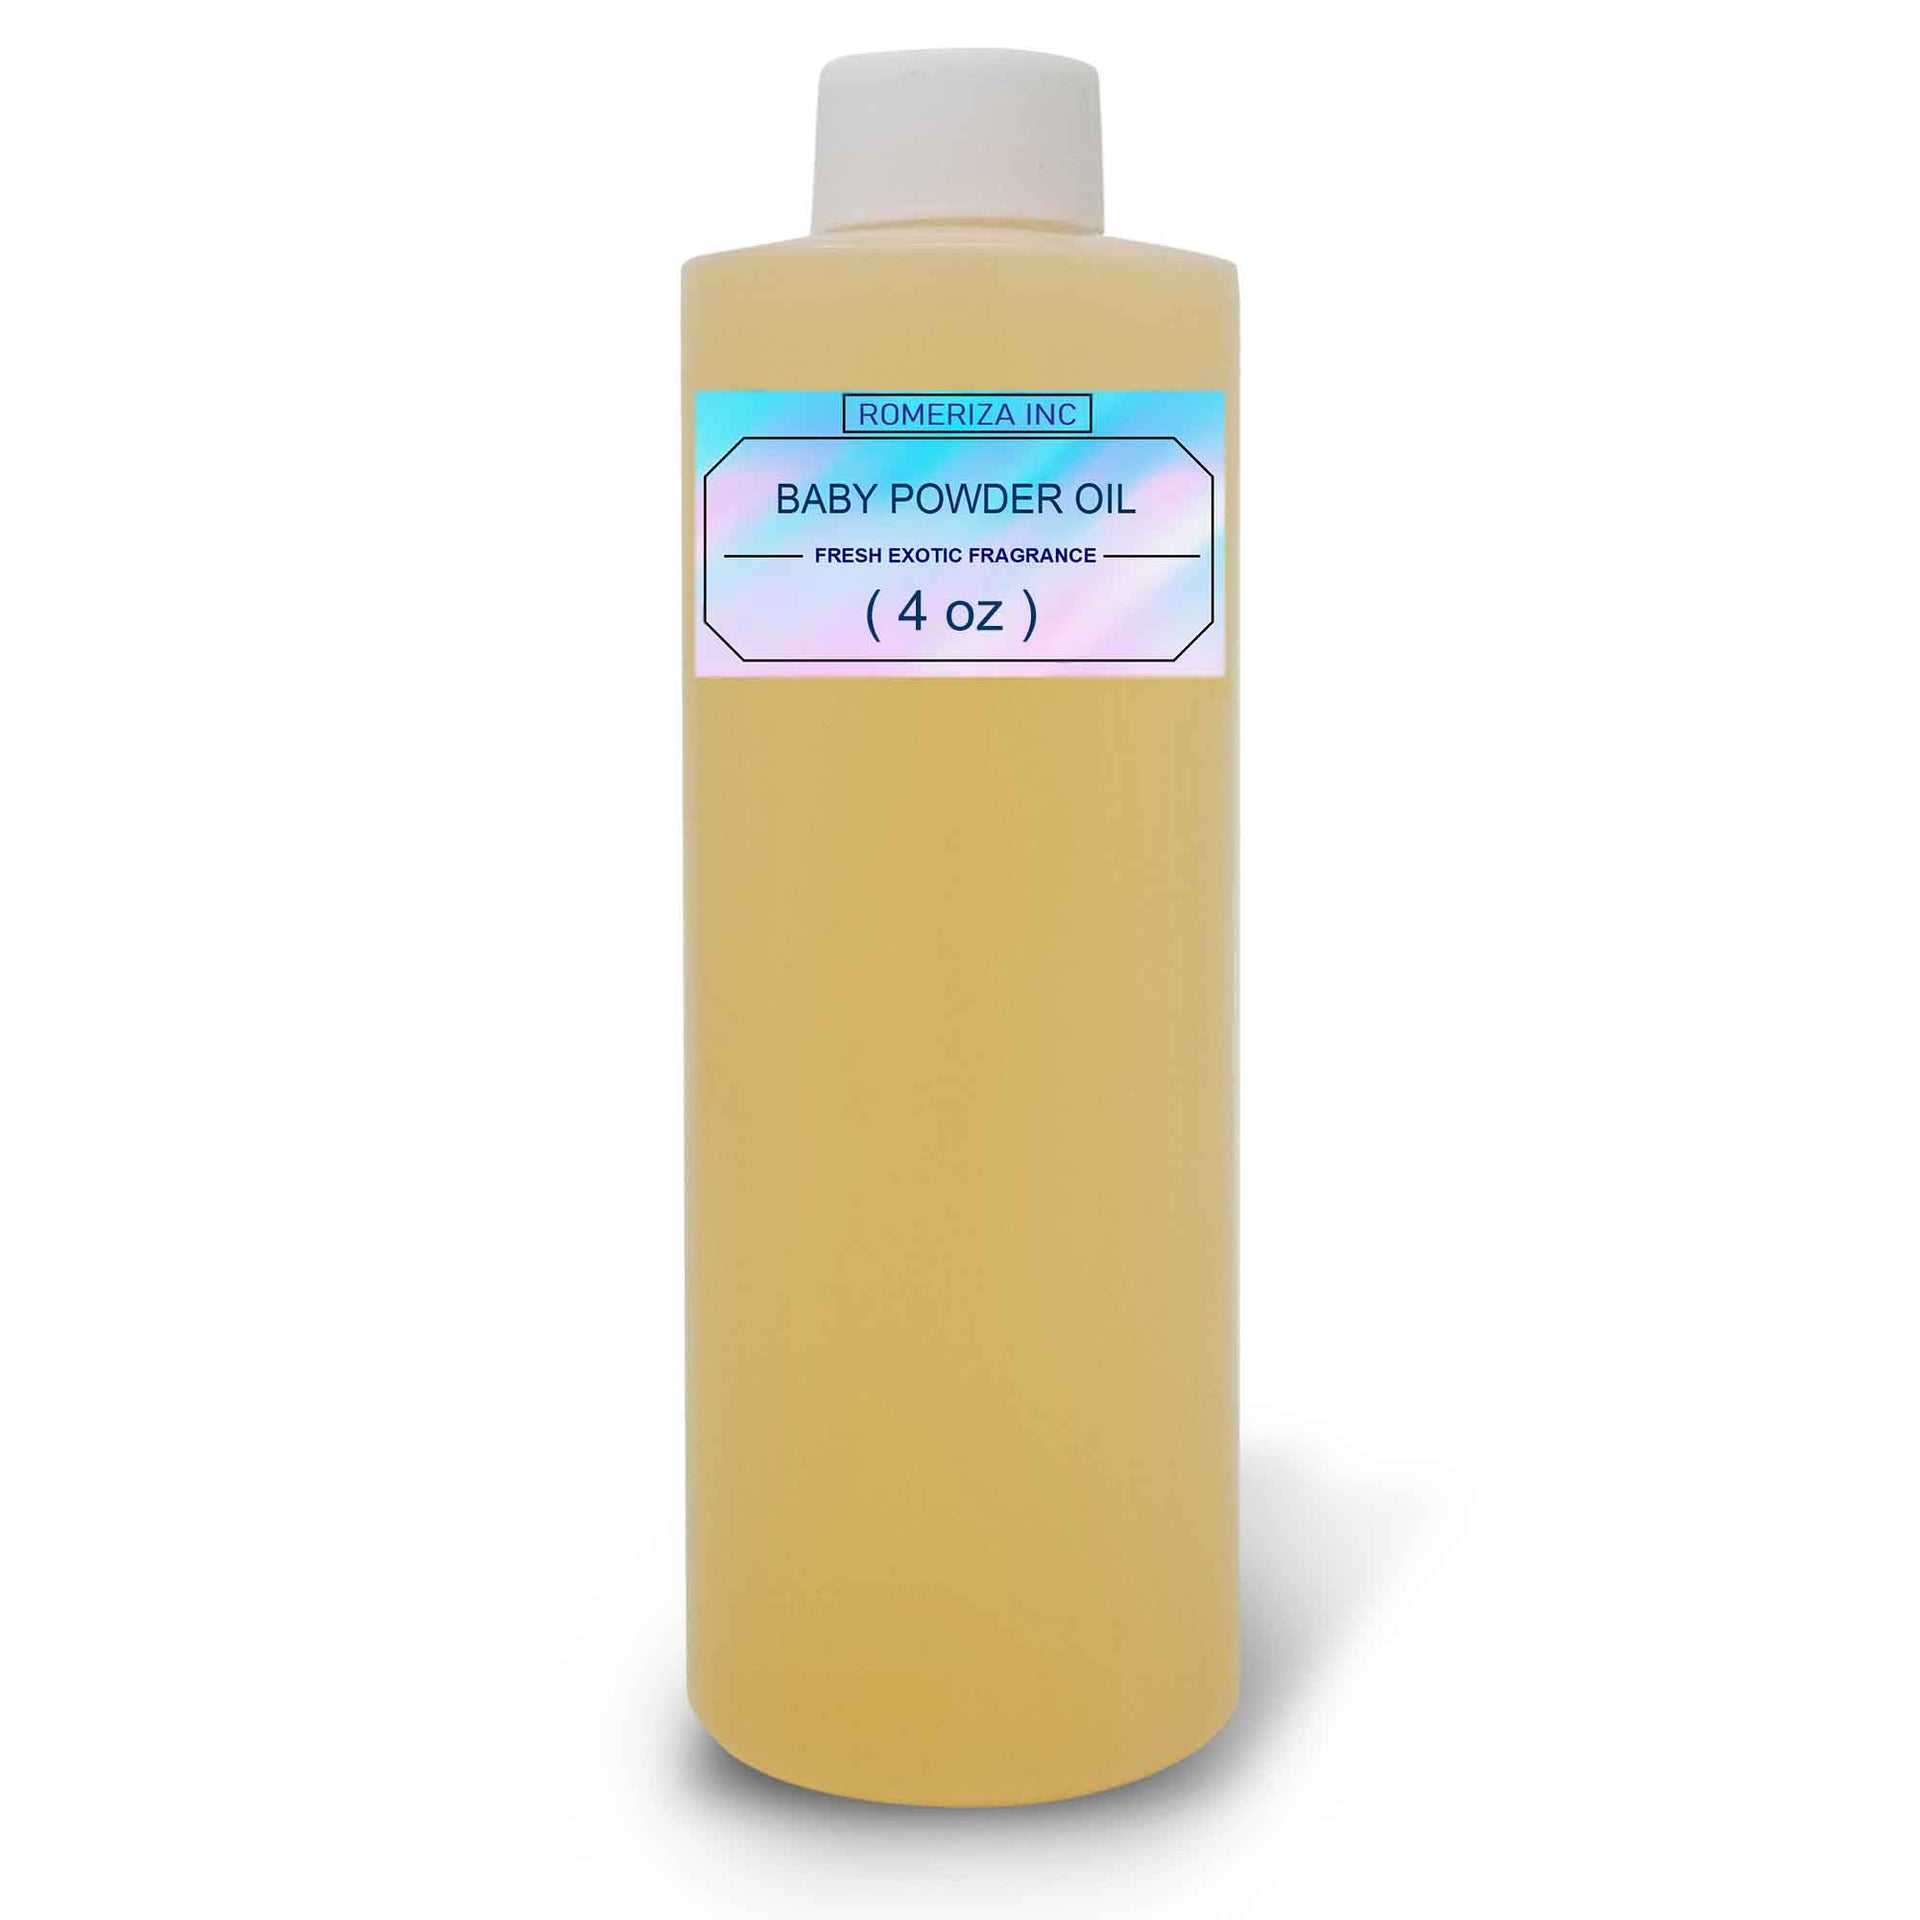 Burning and Body Oil Baby Powder Fragrance Scented Oil 0.5 oz / 15ml